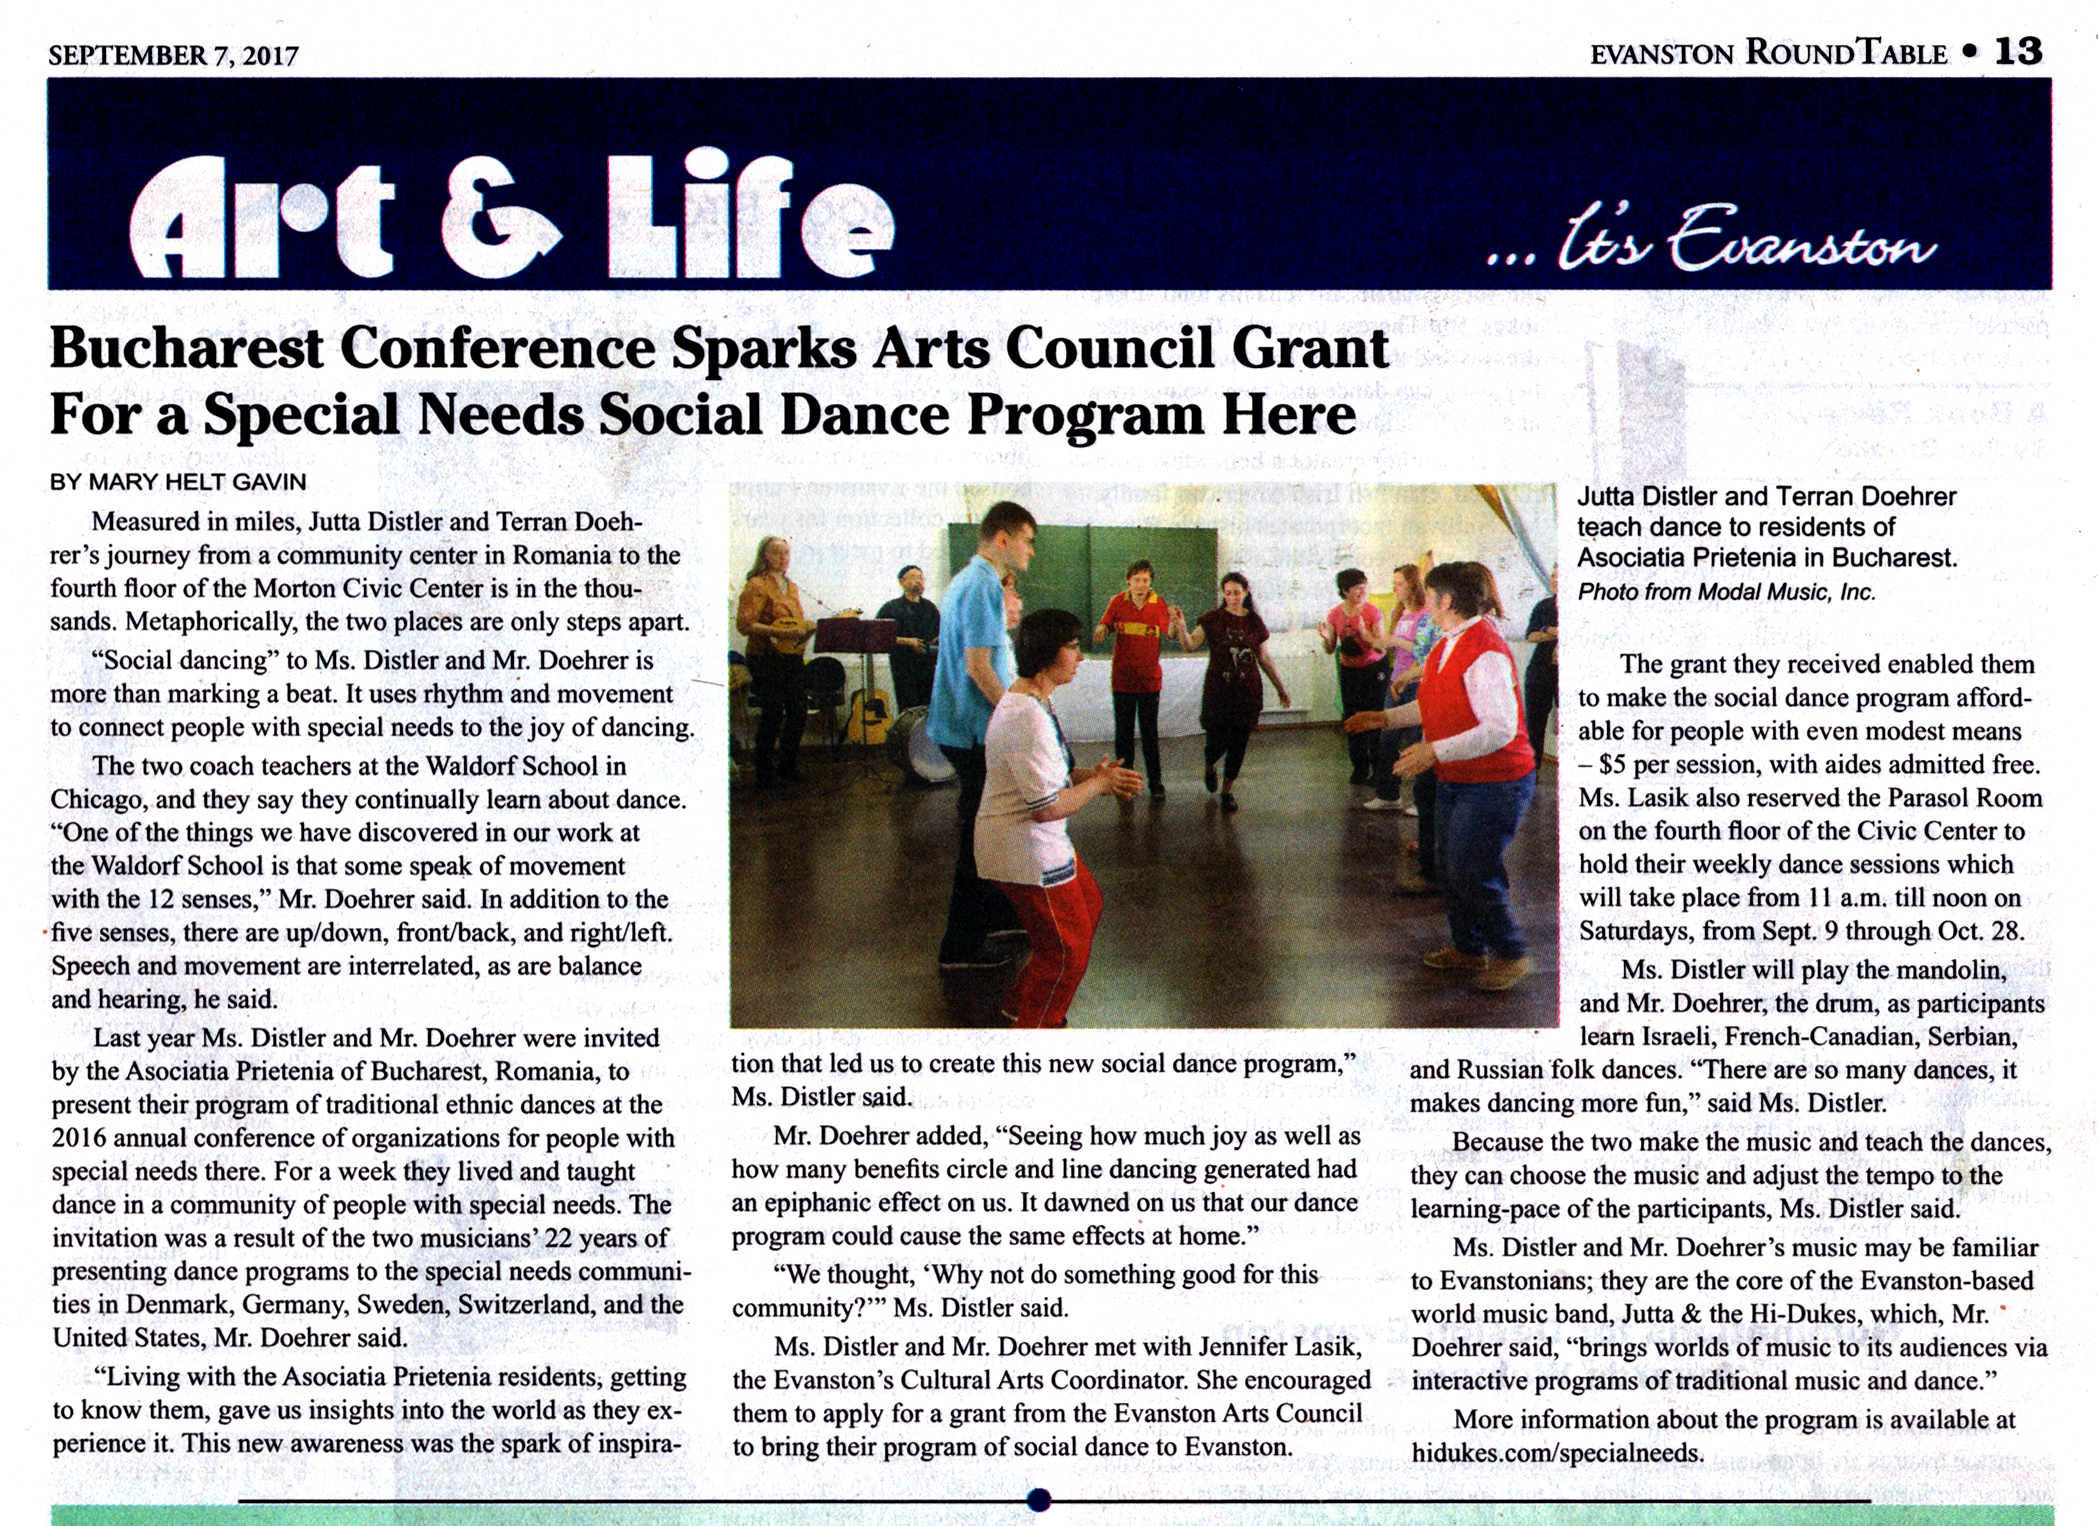 Evanston Round Table article about the Jutta & the Hi-Dukes Special Needs Social Dance program inspired by their work in Romania.